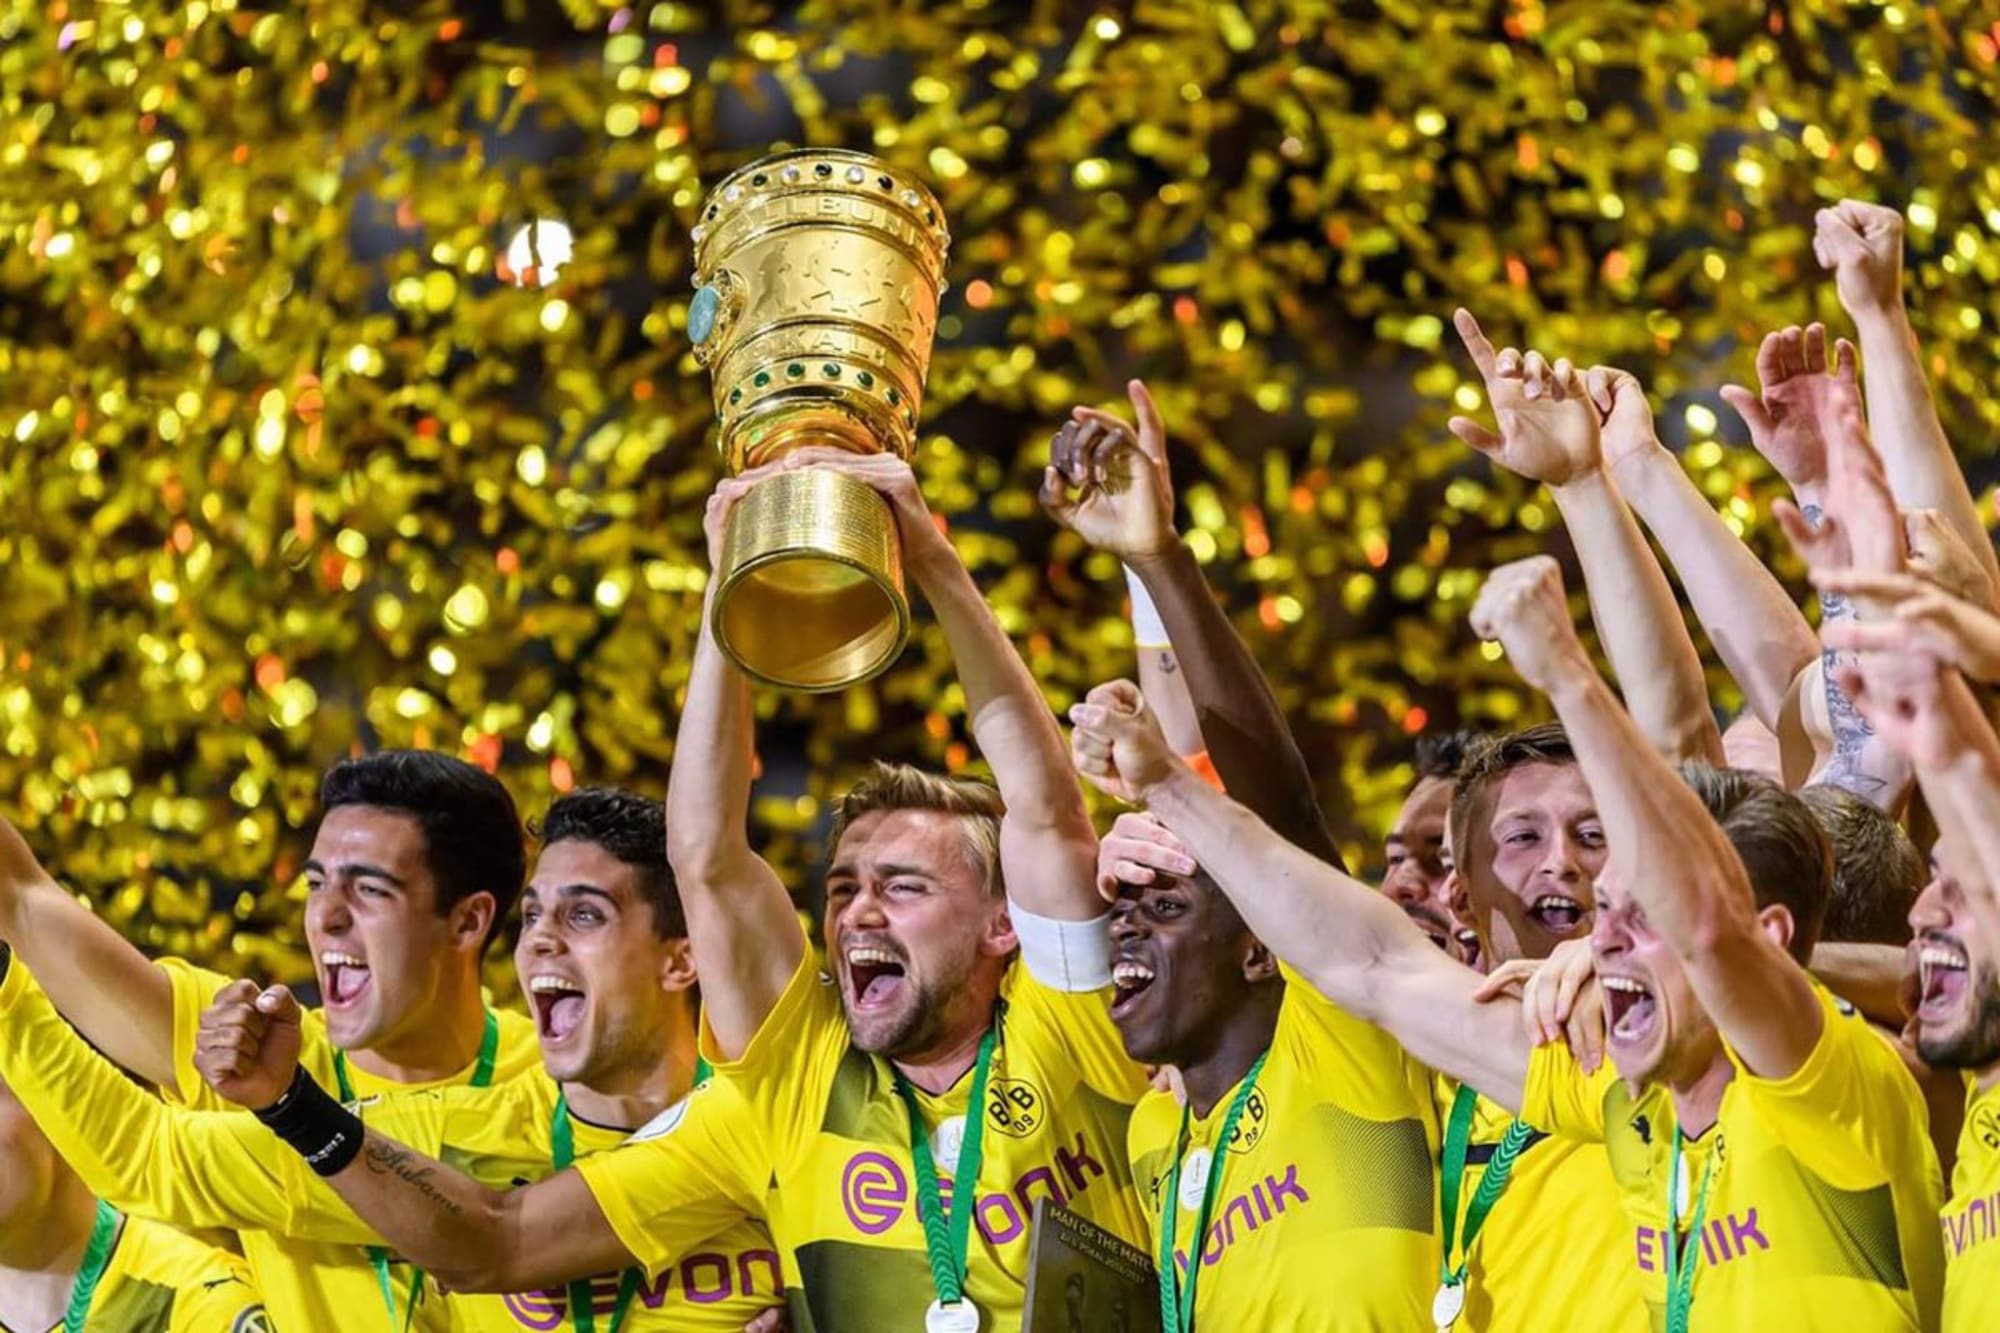  The image shows the football players of Borussia Dortmund celebrating their victory with the DFB-Pokal trophy in front of their cheering fans at Wembley Stadium.